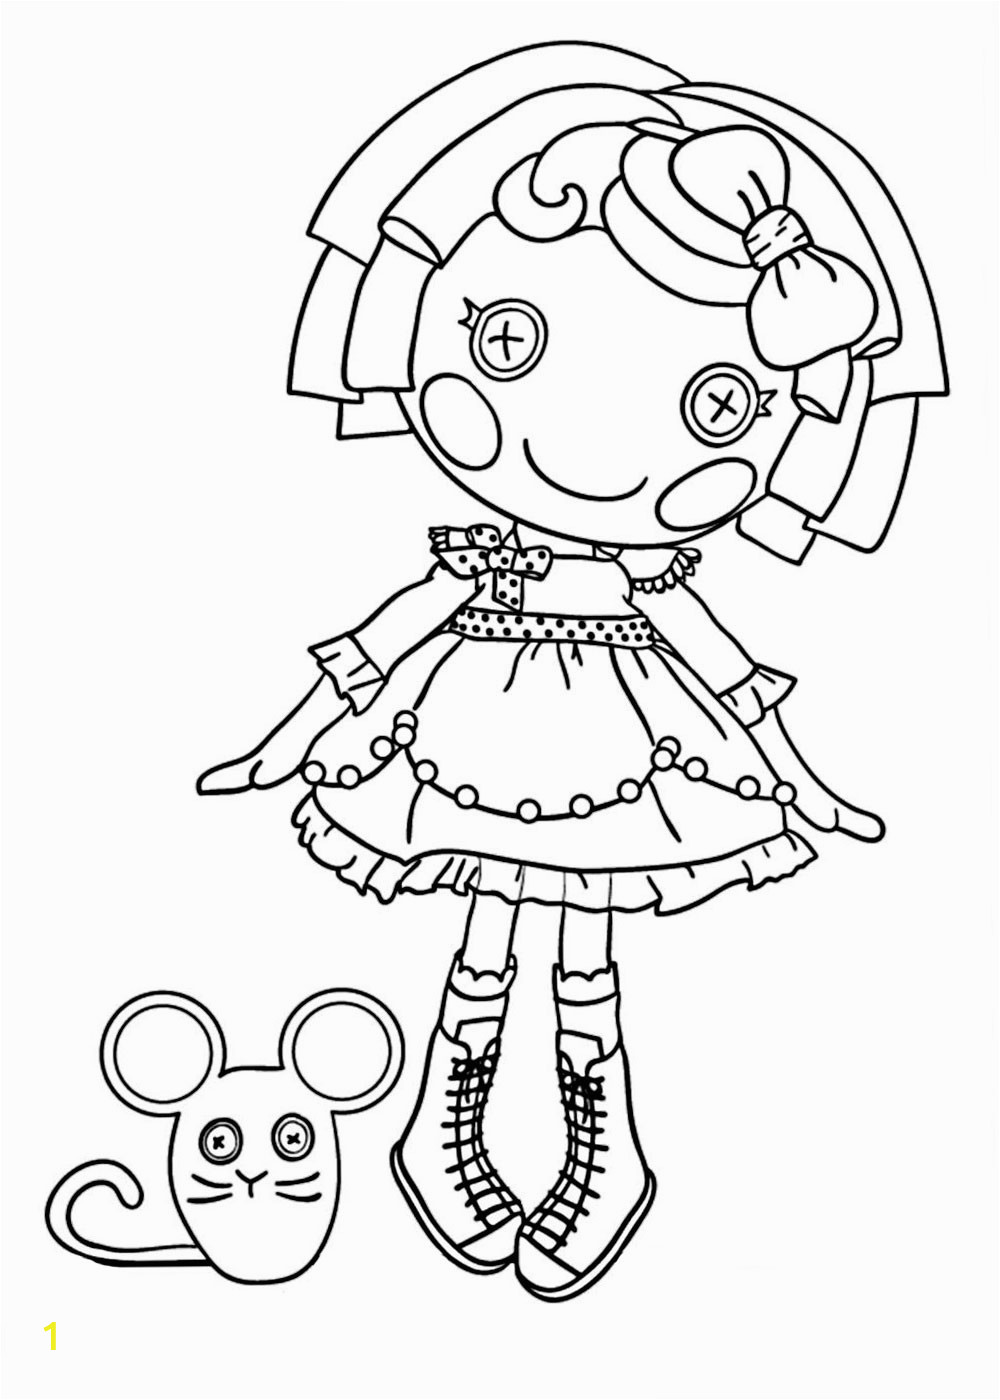 Free Coloring Pages Of Lalaloopsy Dolls Lalaloopsy Coloring Pages for Girls to Print for Free